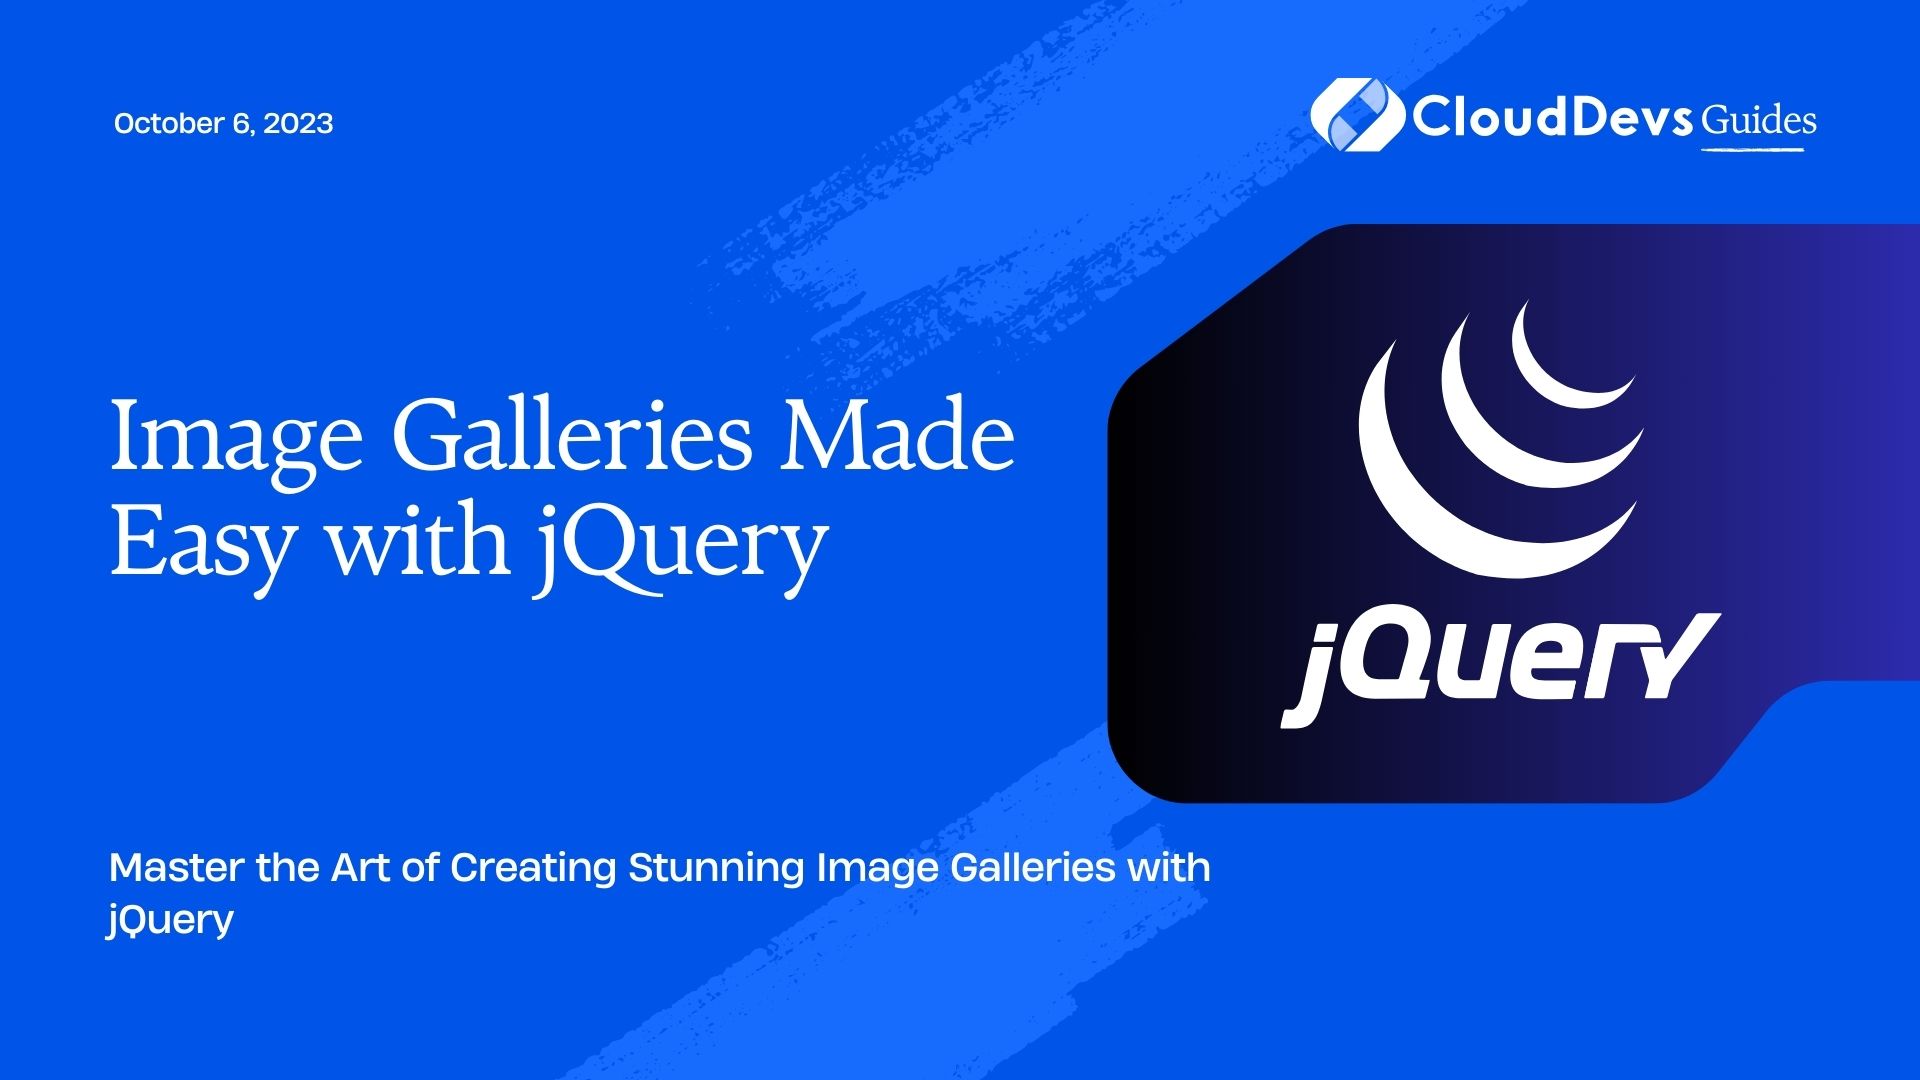 Image Galleries Made Easy with jQuery